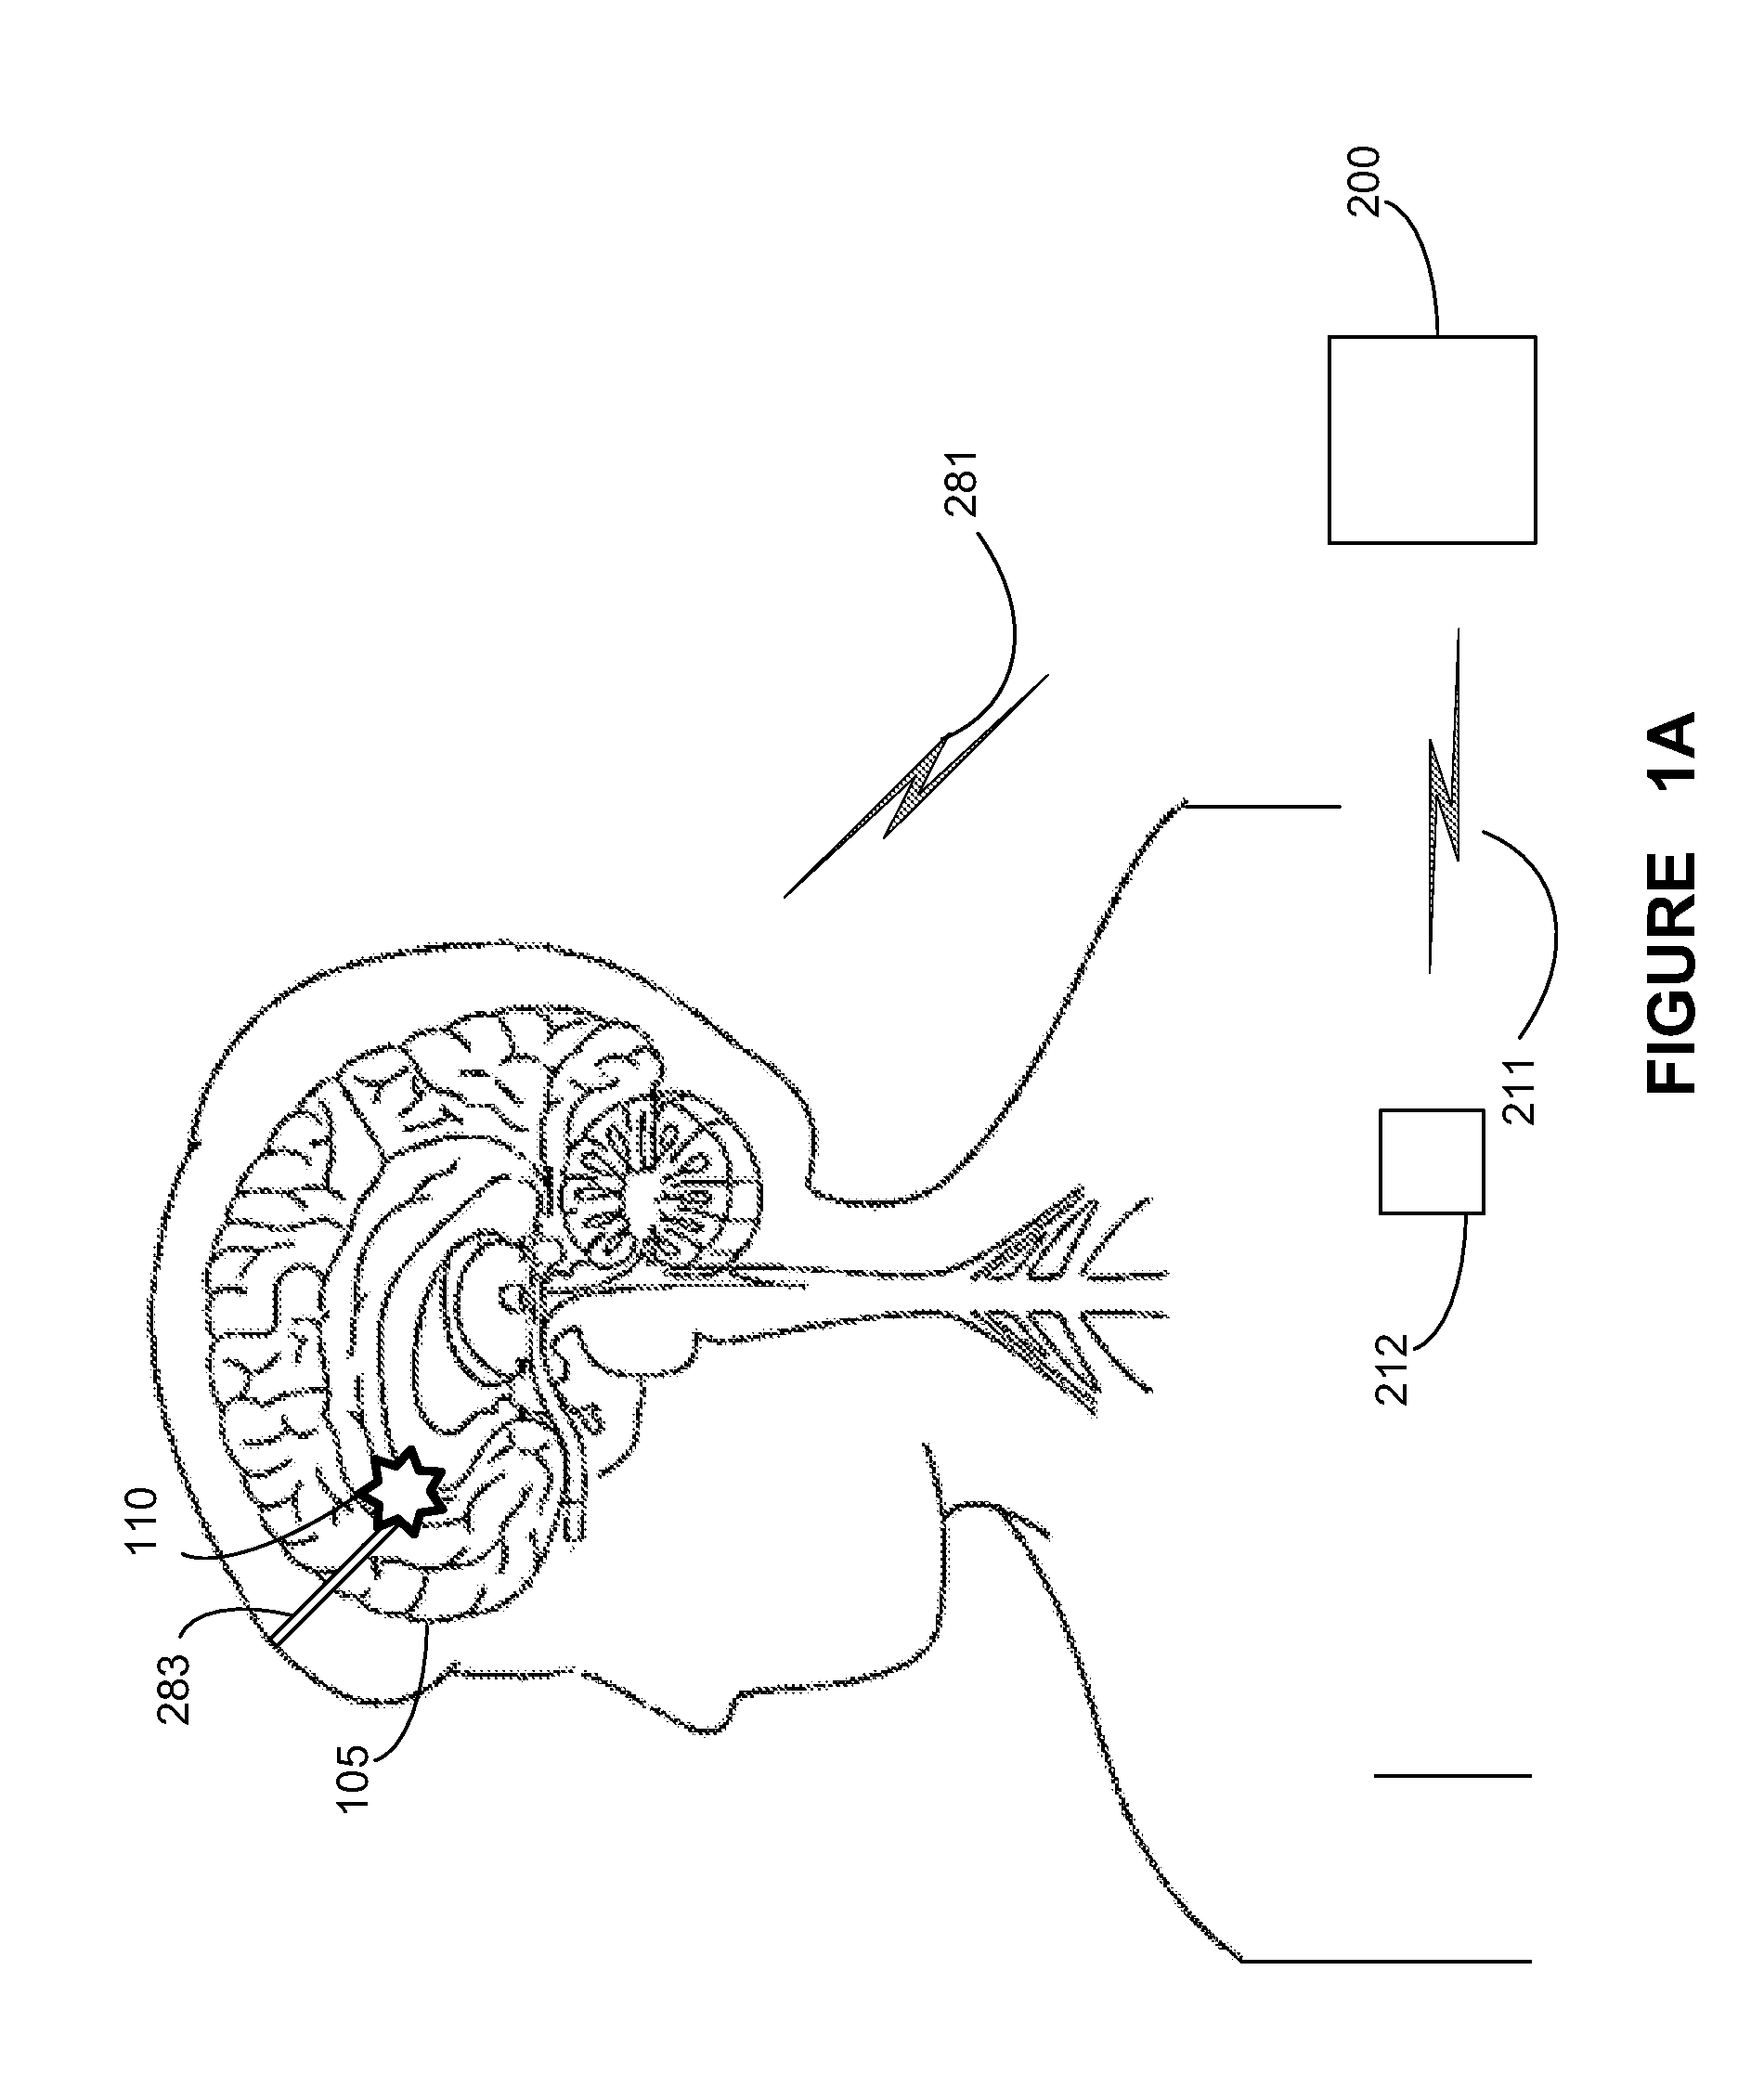 System and apparatus for increasing regularity and/or phase-locking of neuronal activity relating to an epileptic event